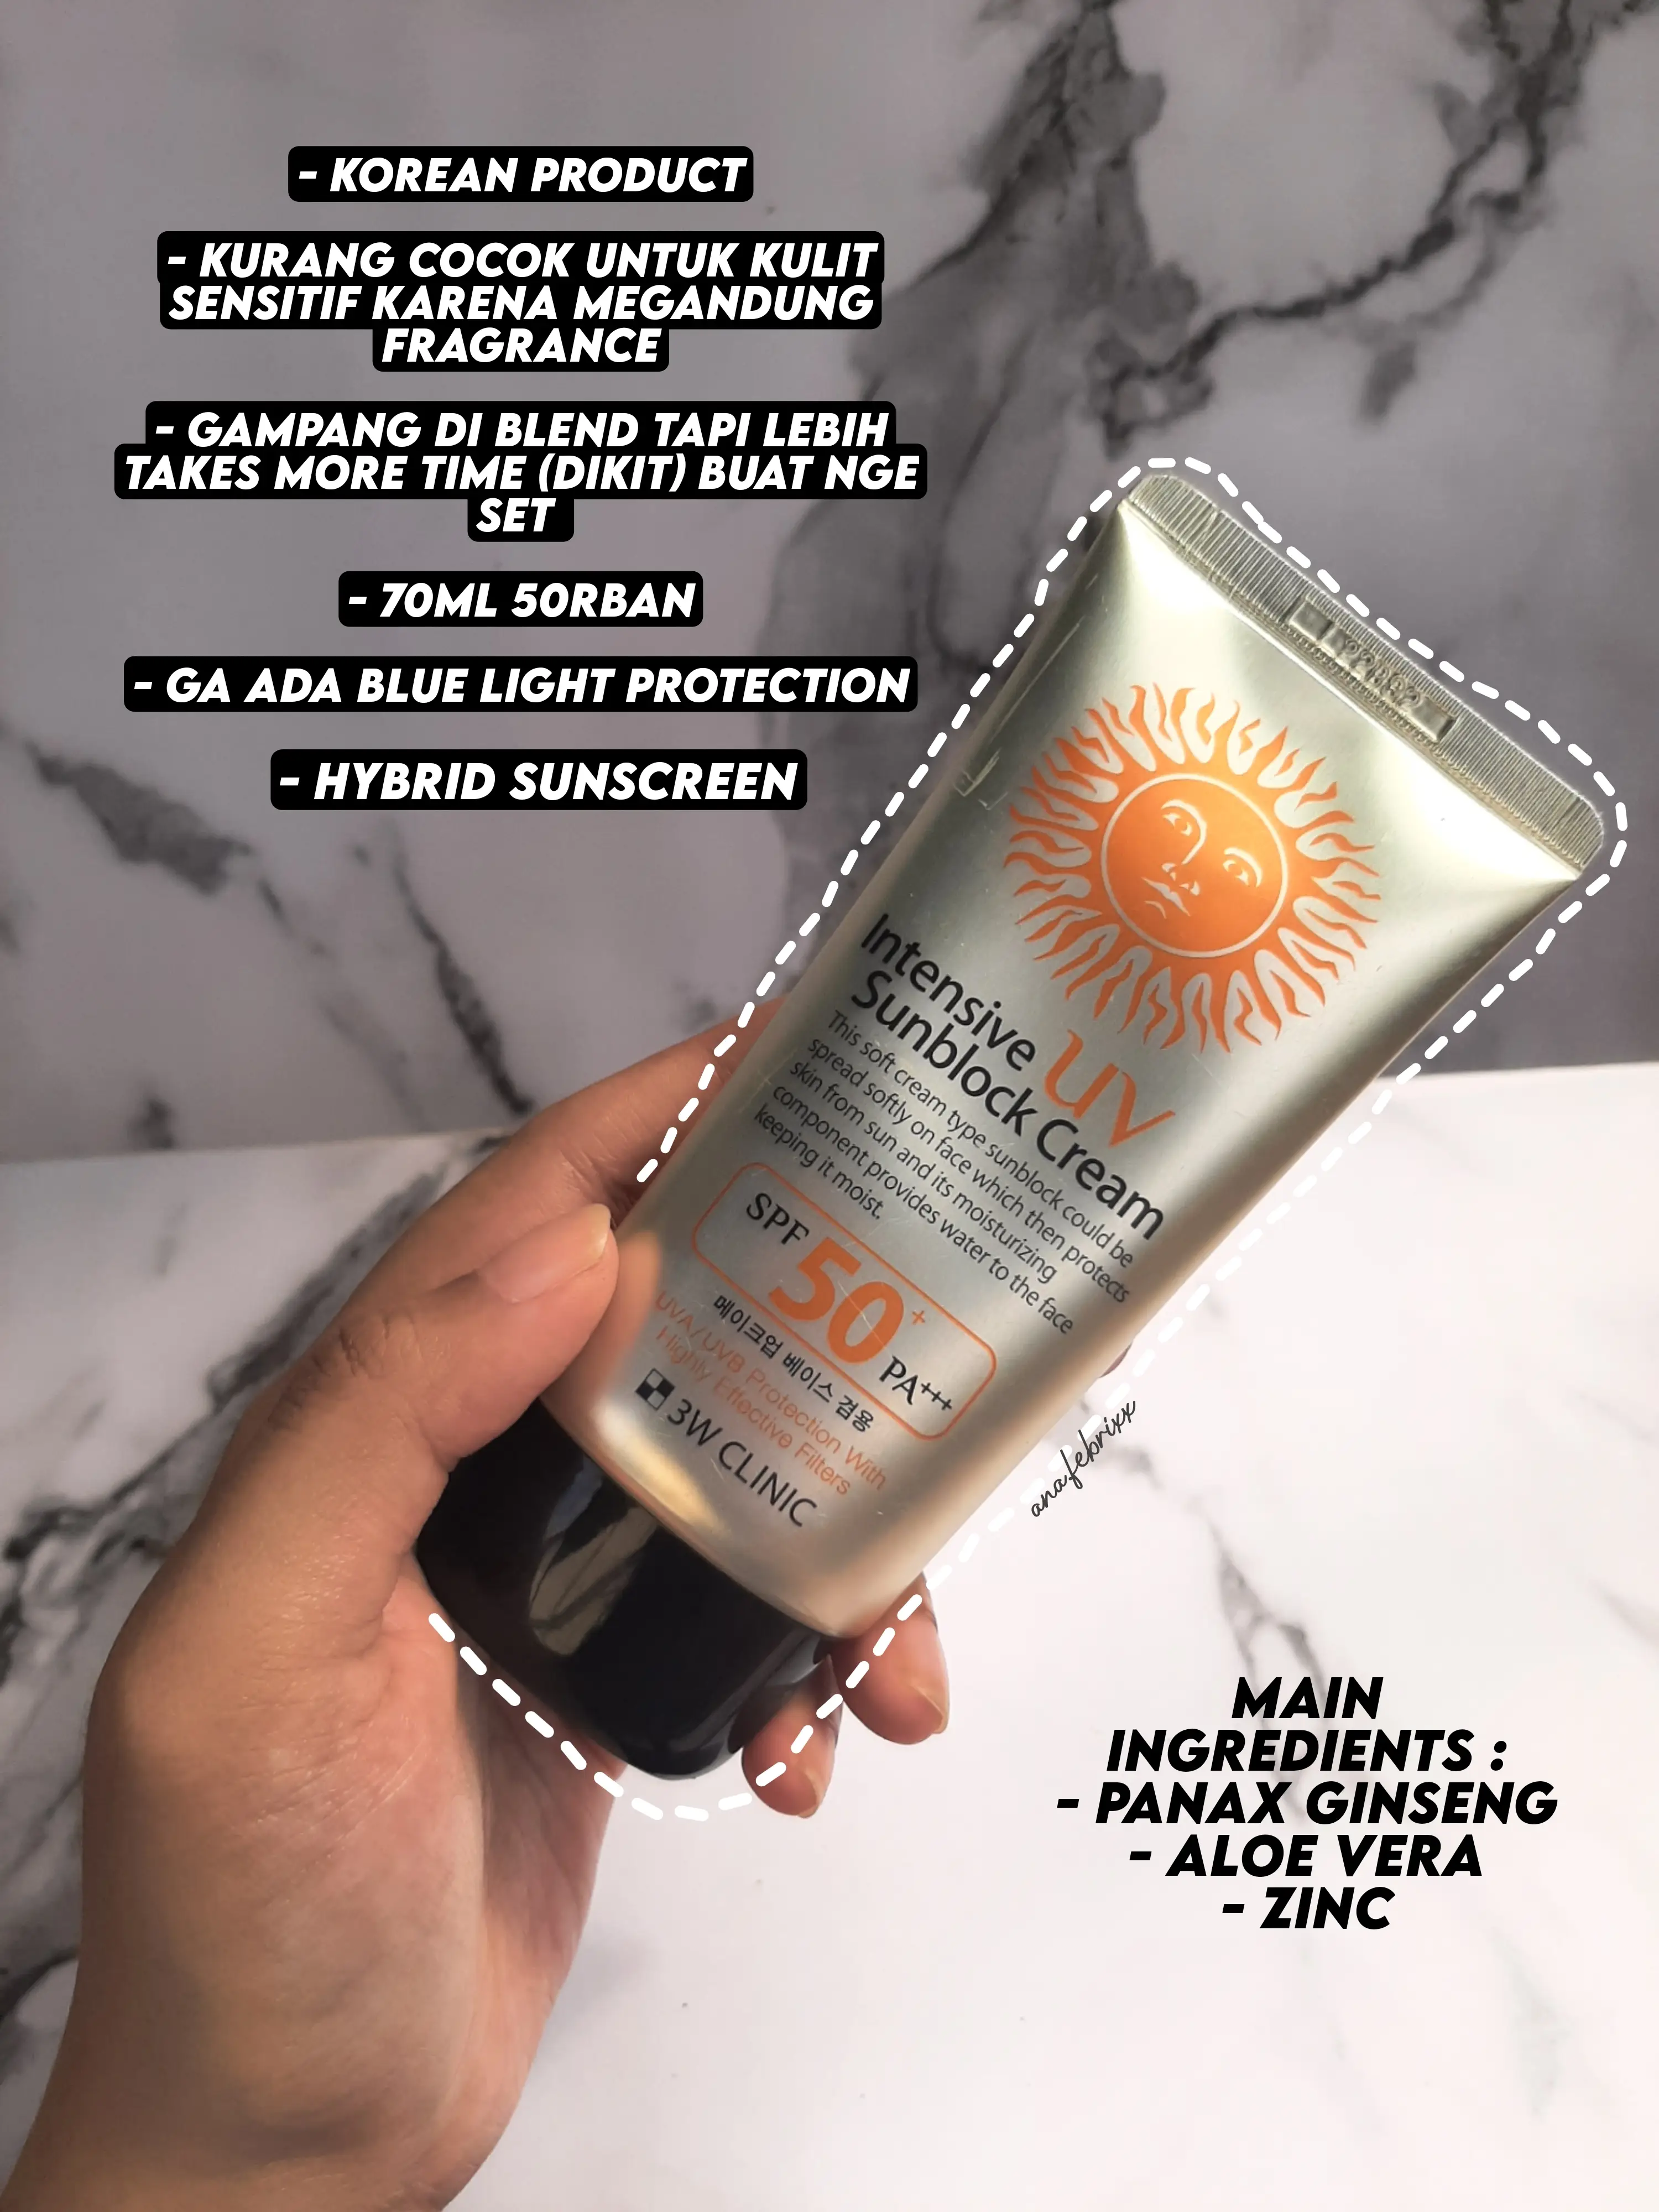 BATTLE SUNSCREEN VIRAL | Gallery posted by ana.febrixx | Lemon8